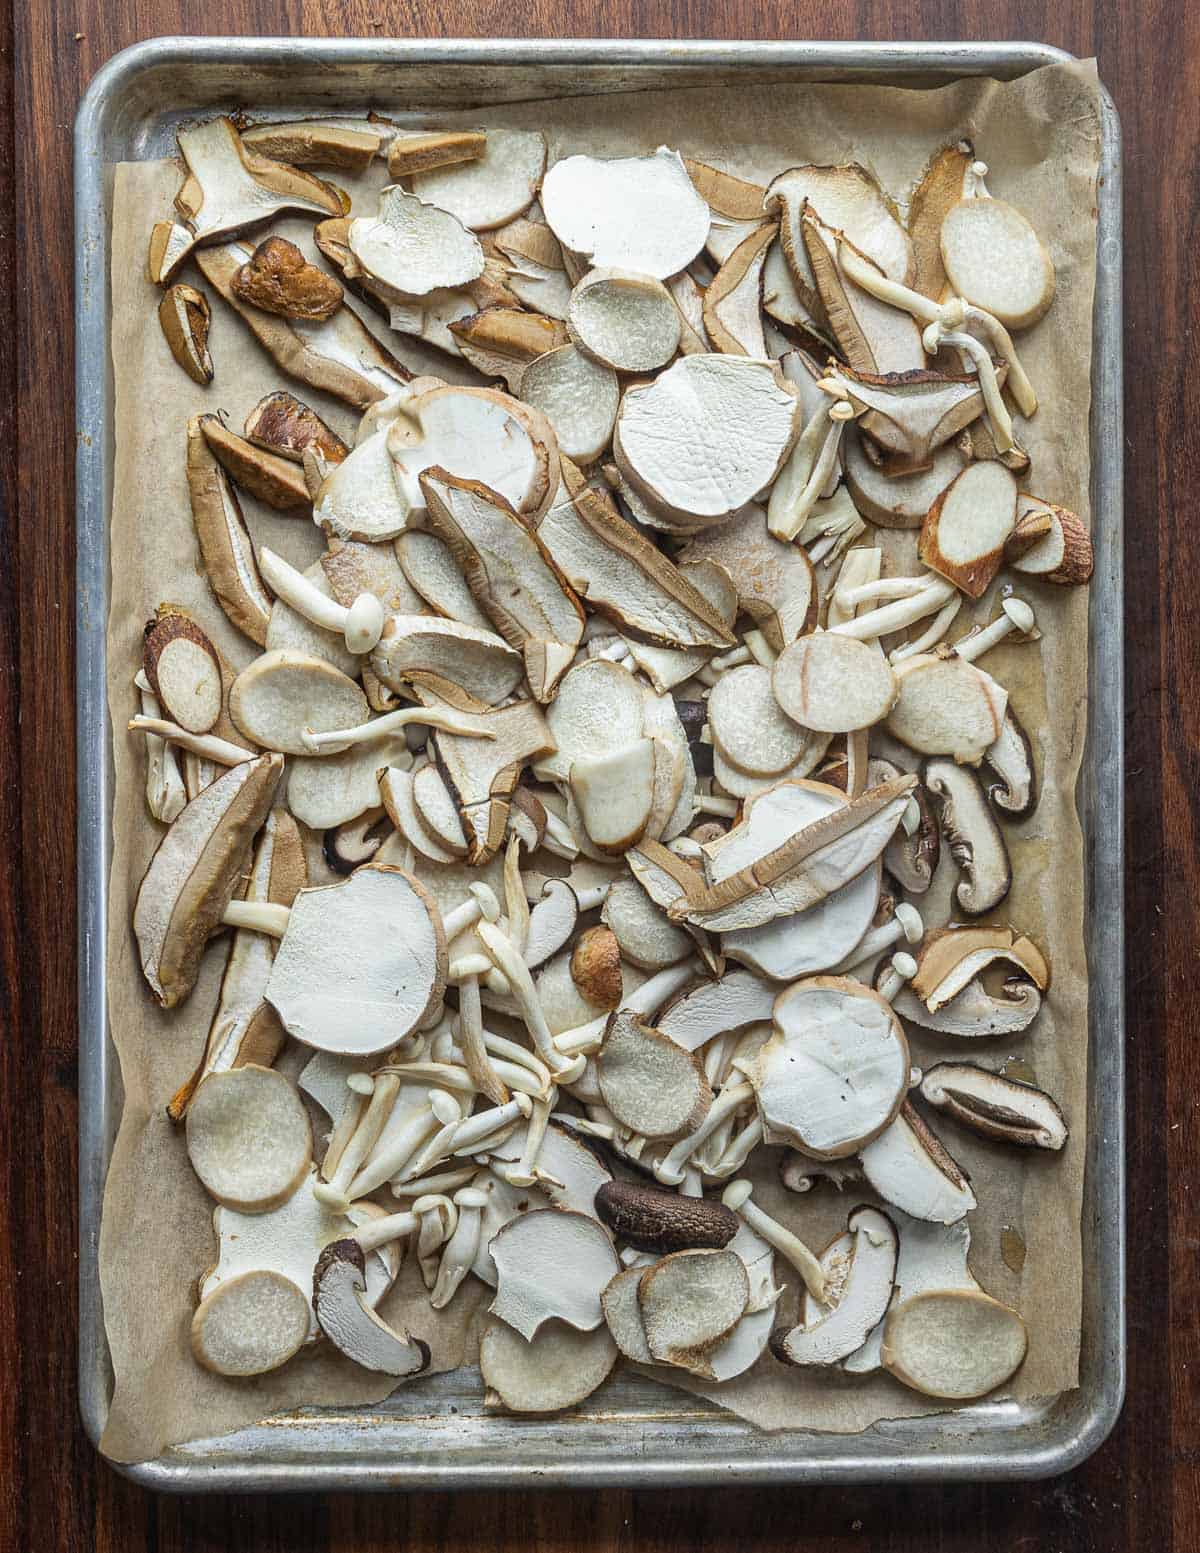 A baking sheet filled with cooked oyster, porcini and puffball mushrooms. 